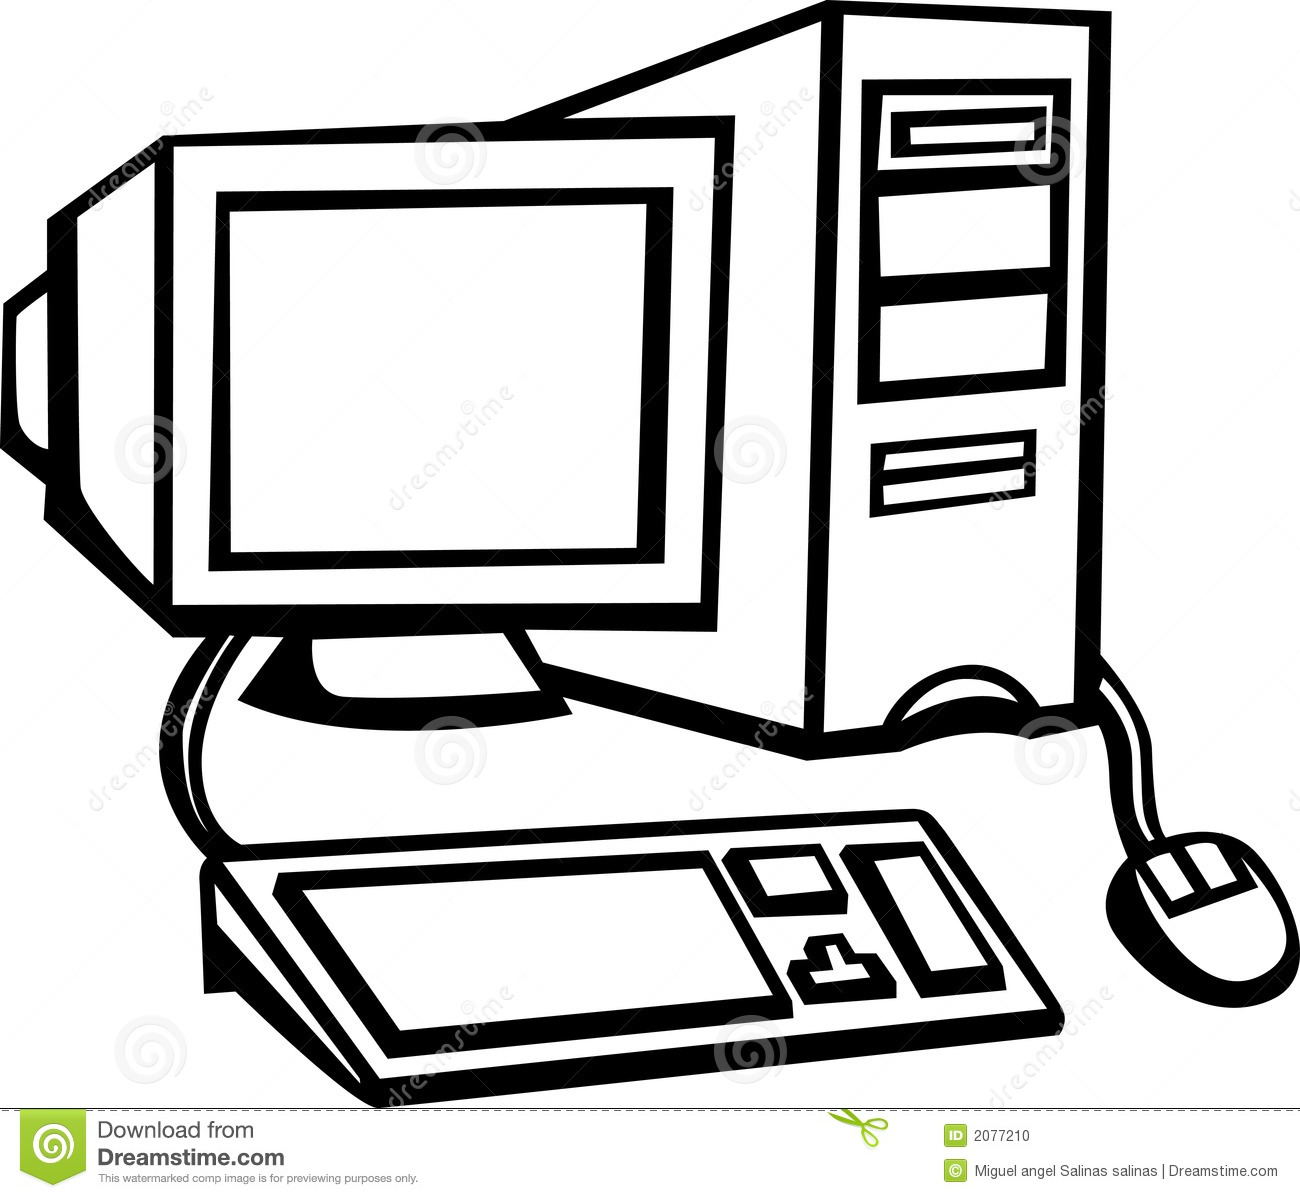 Computer Monitor Clipart Black And White Free download